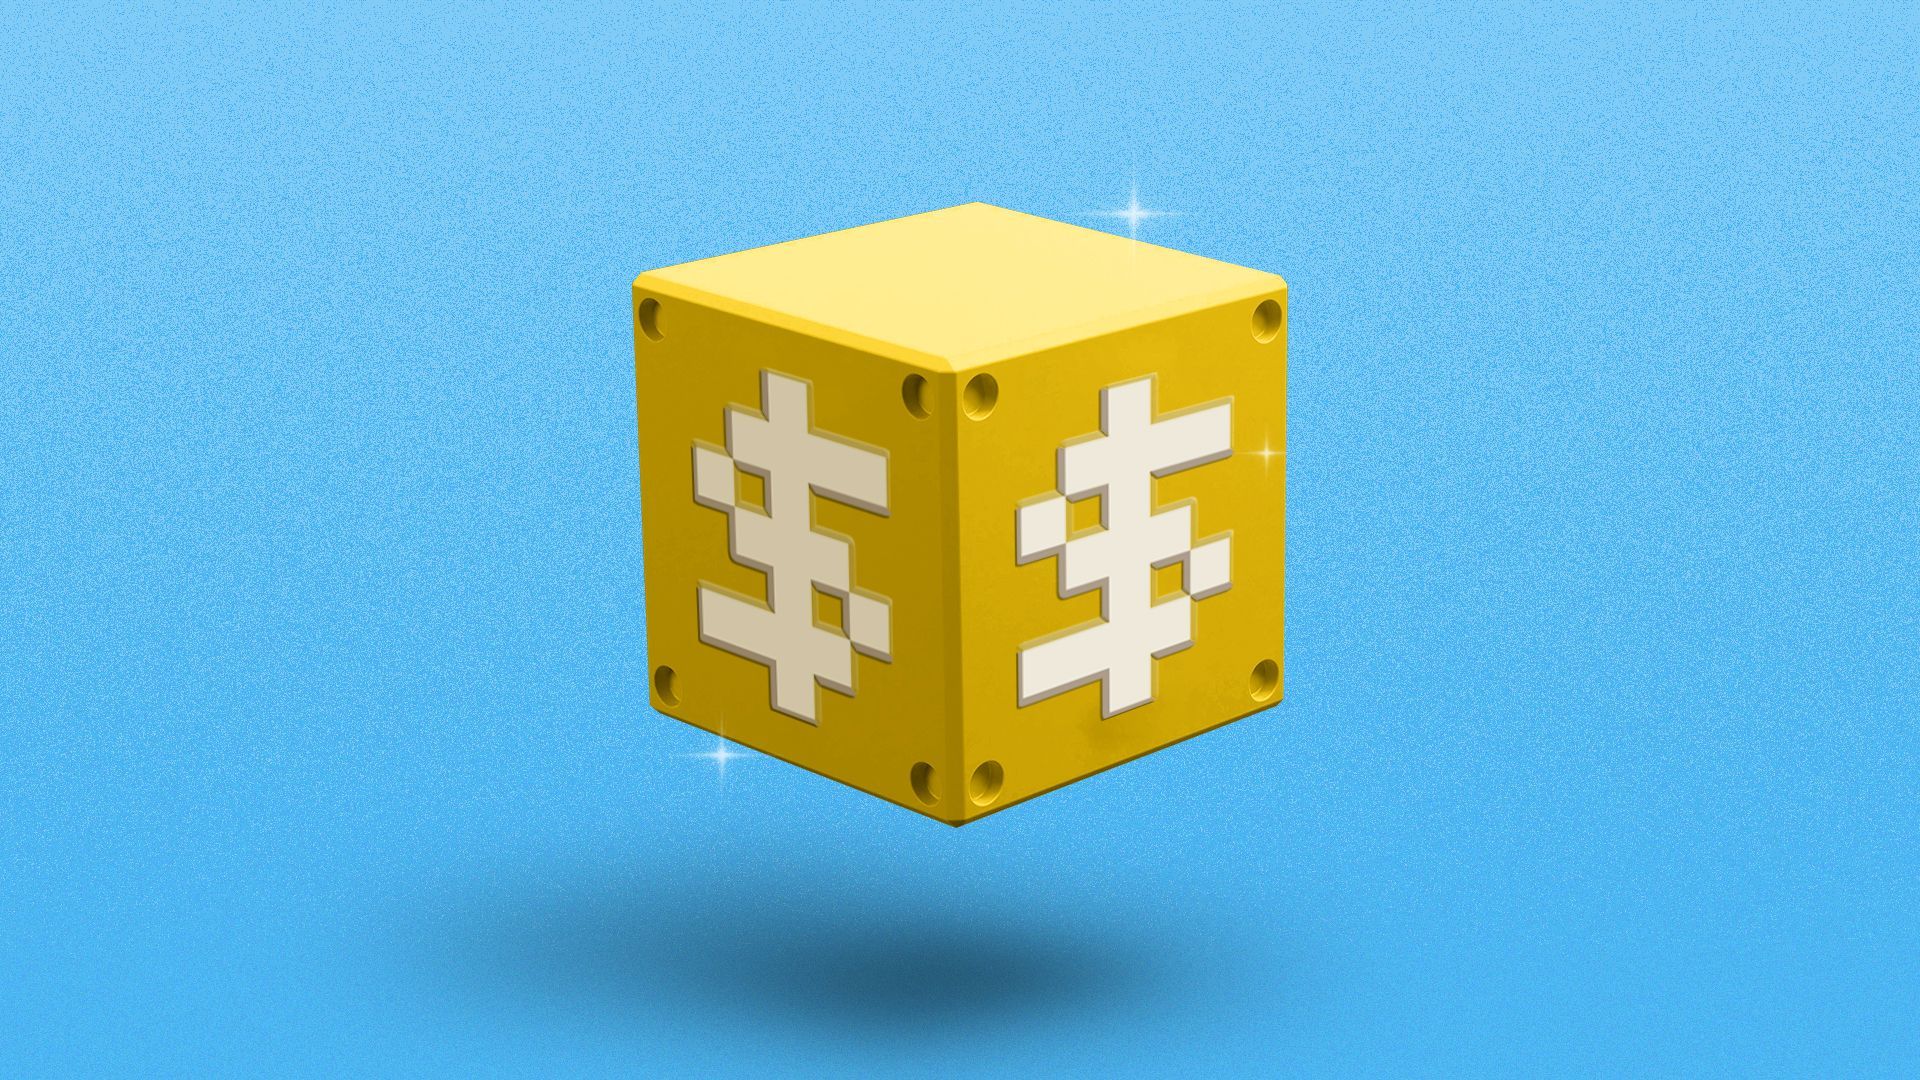 Illustration of a floating Mario-style block with a dollar sign on it.